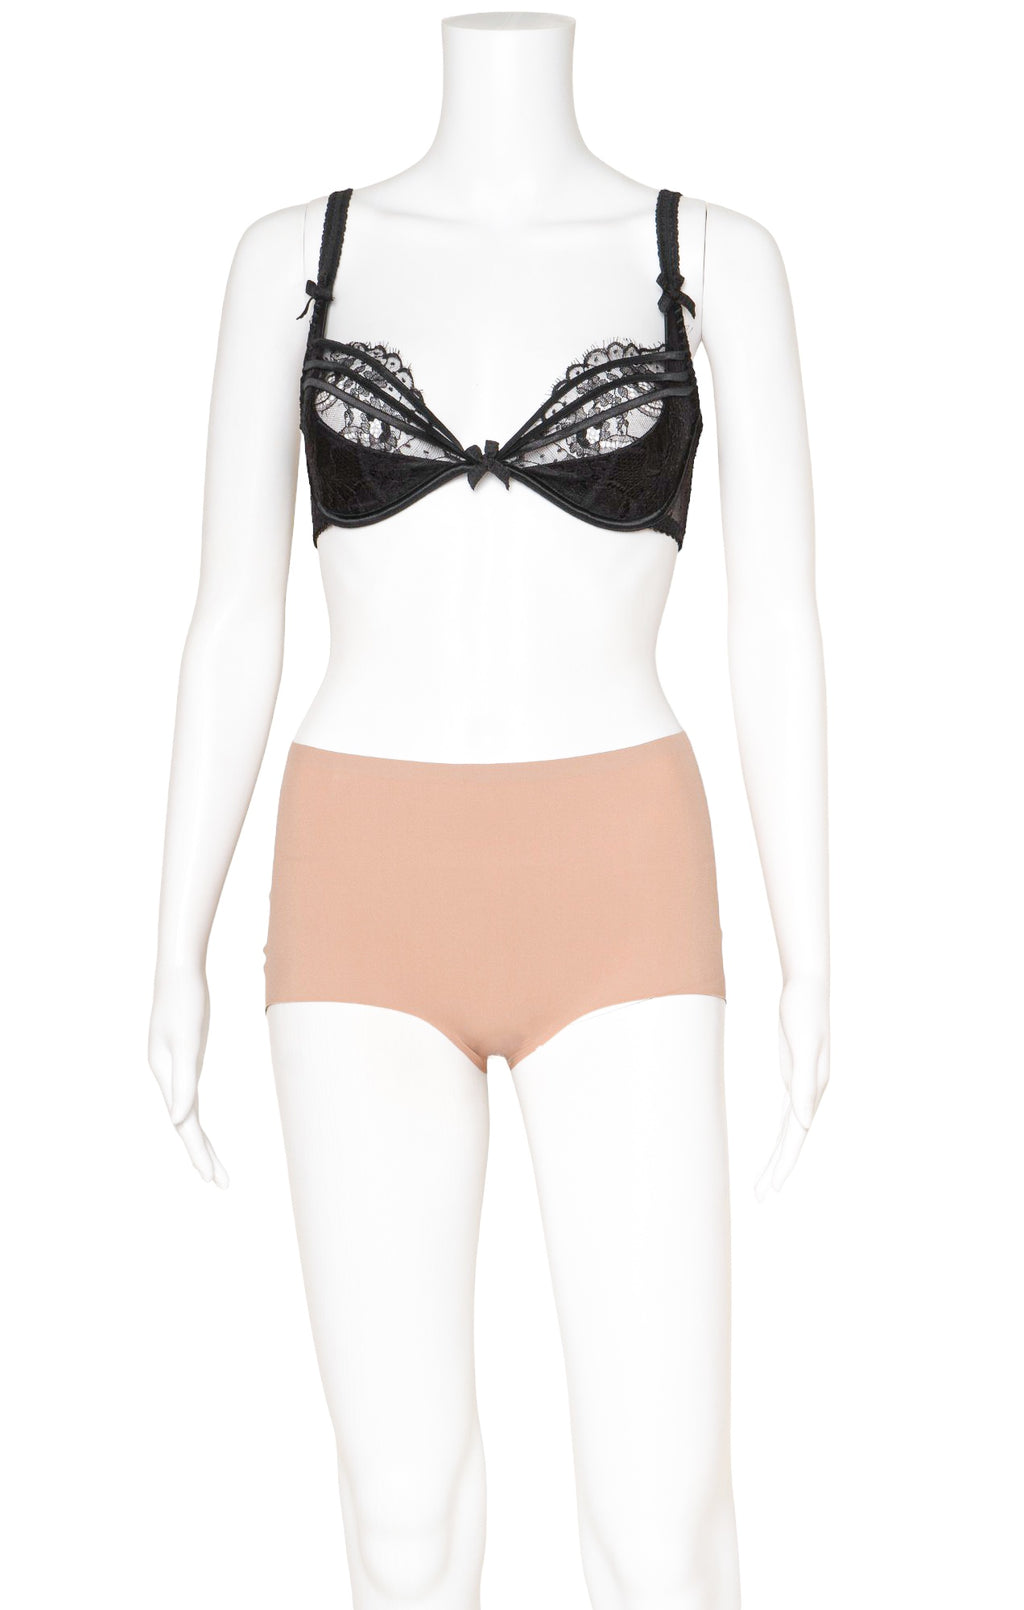 AGENT PROVOCATEUR (NEW) with tags Bra Size: 34D